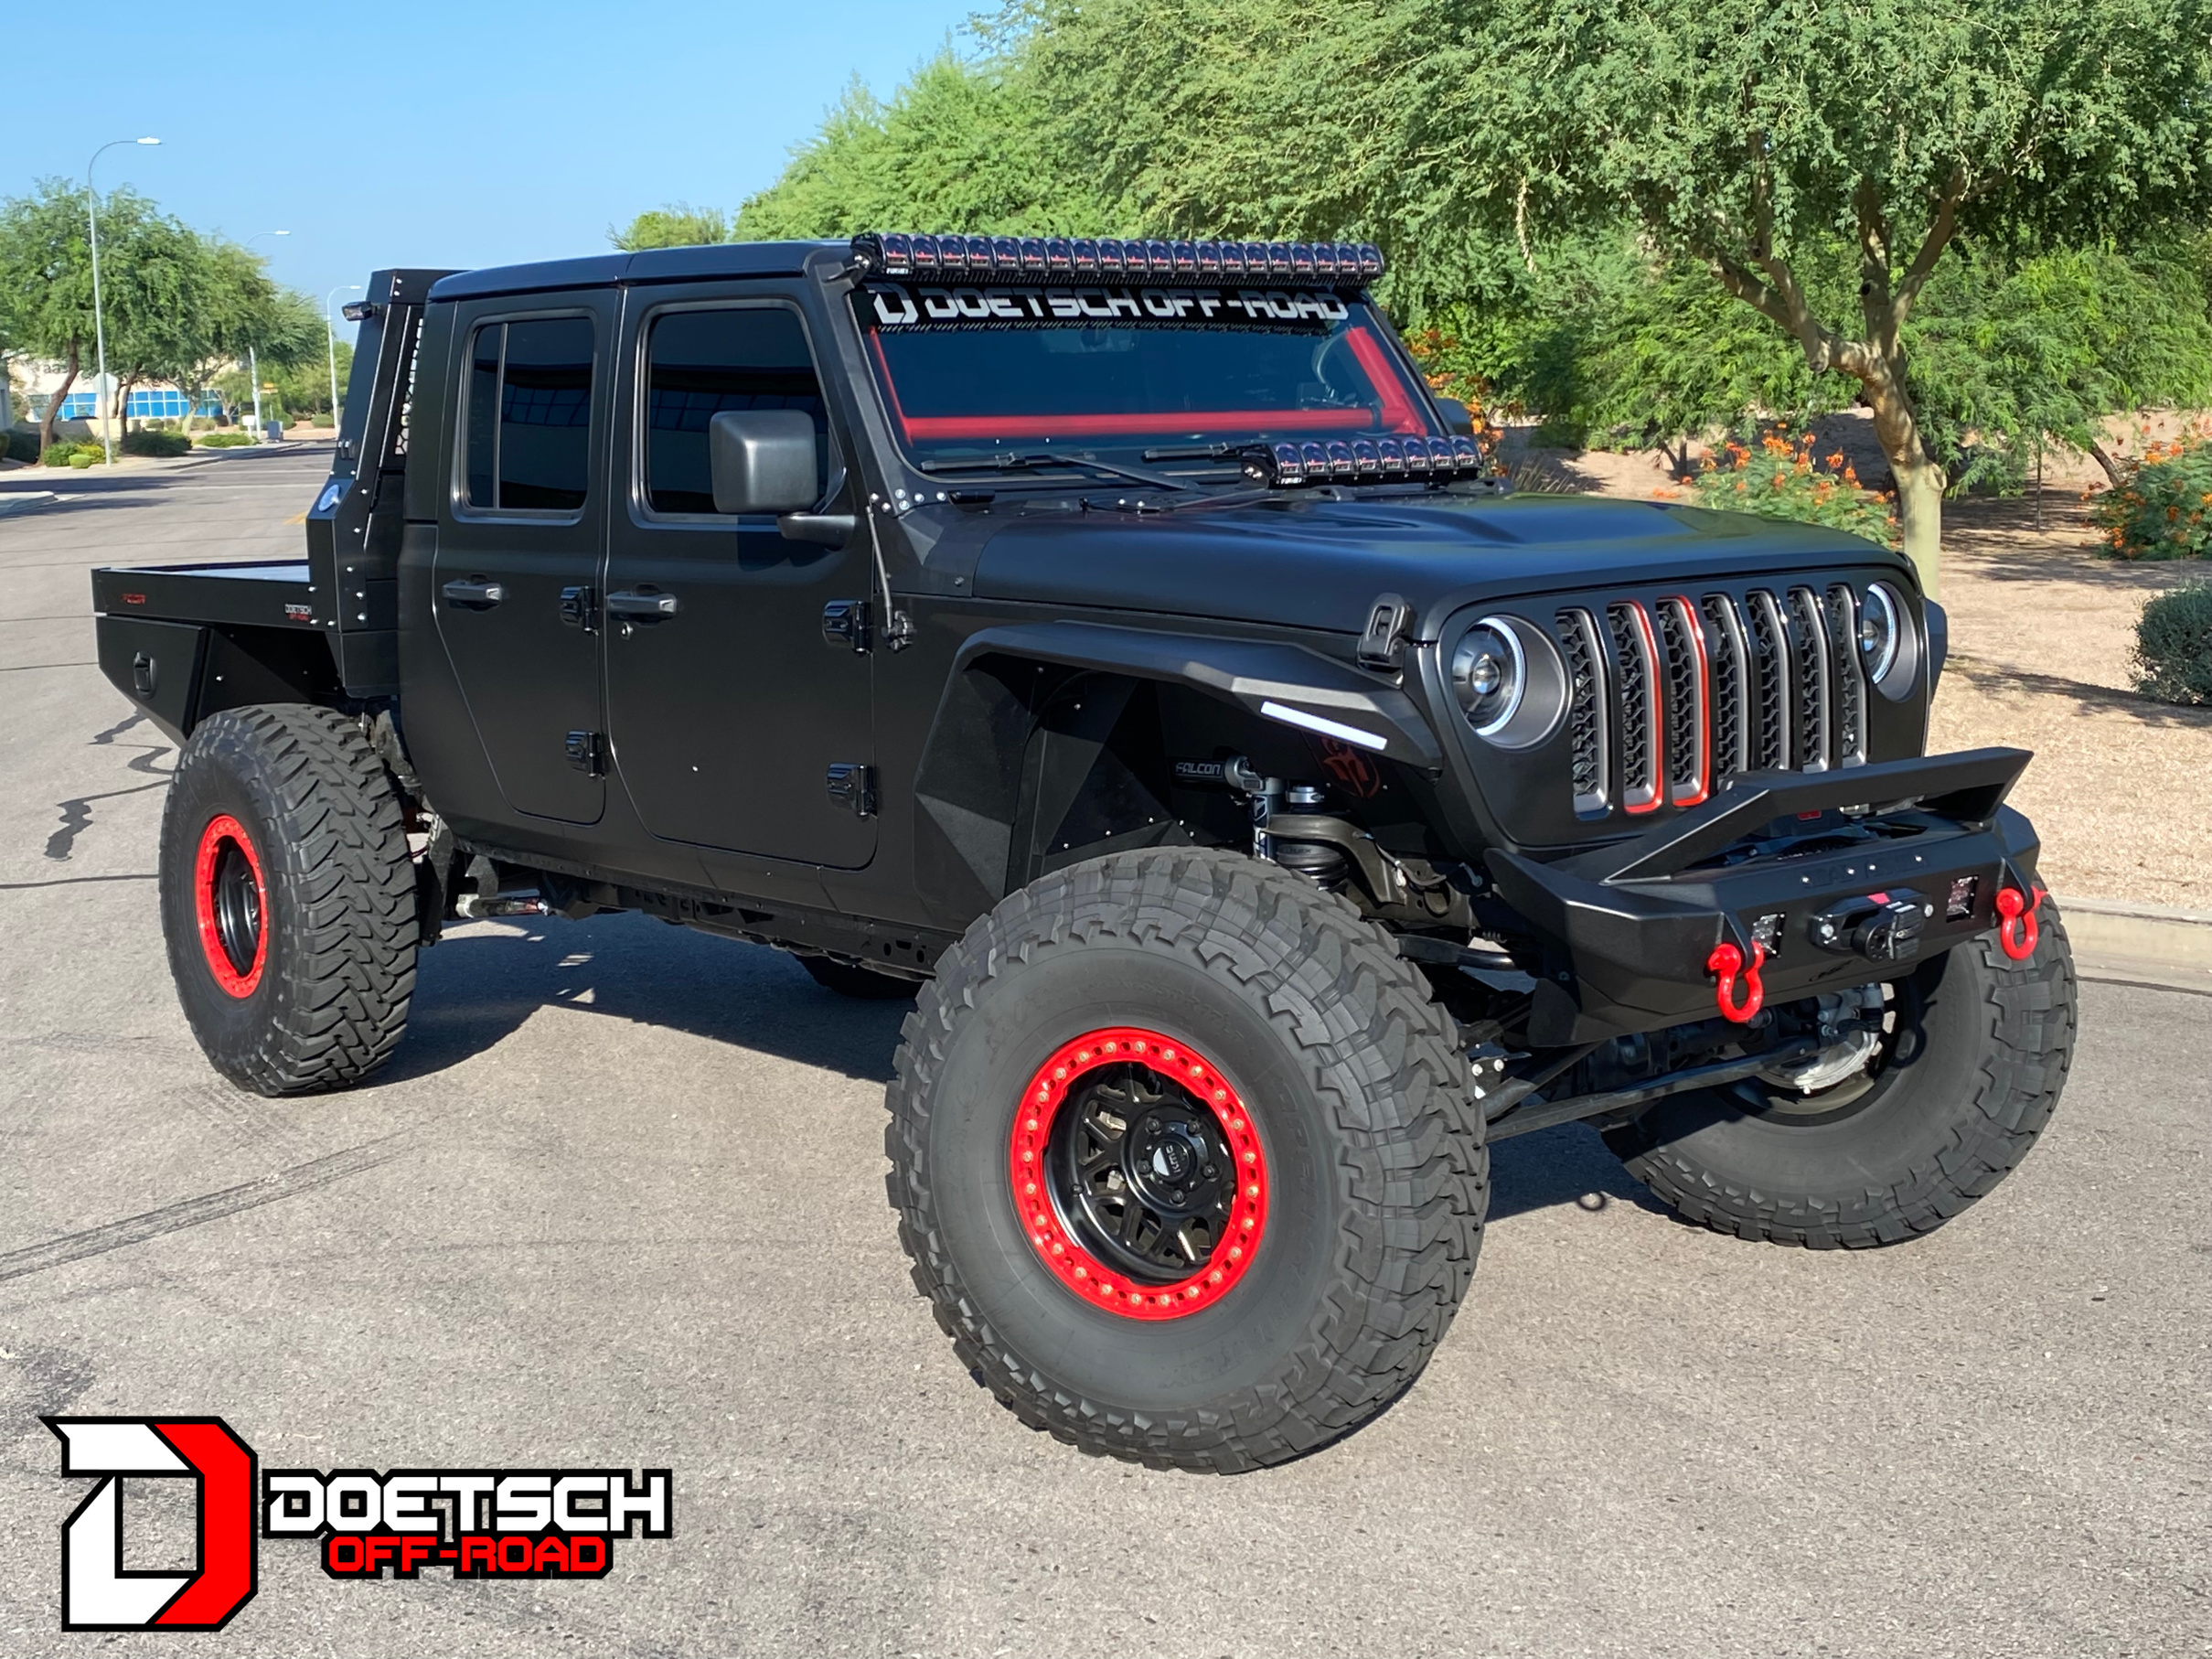 Dave Doetsch Jeep Gladiator Front View